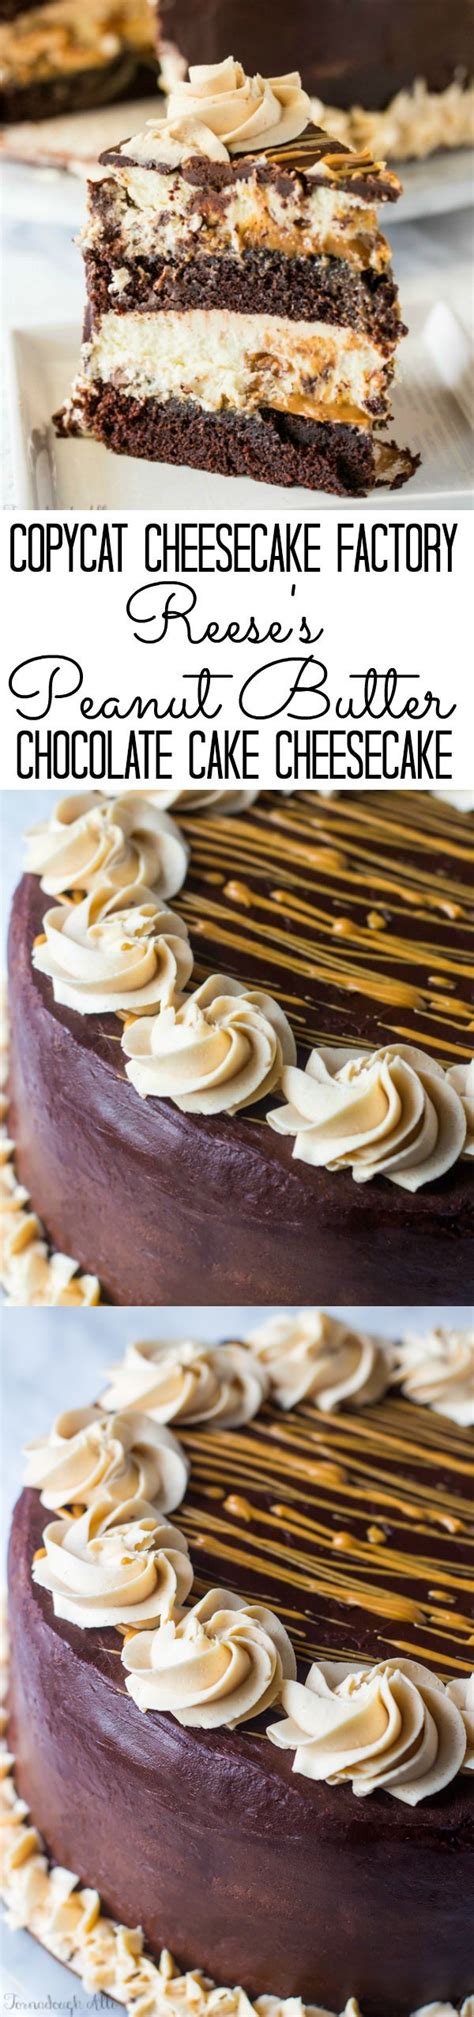 Copycat Cheesecake Factory Reeses Peanut Butter Chocolate Cake Cheesecake